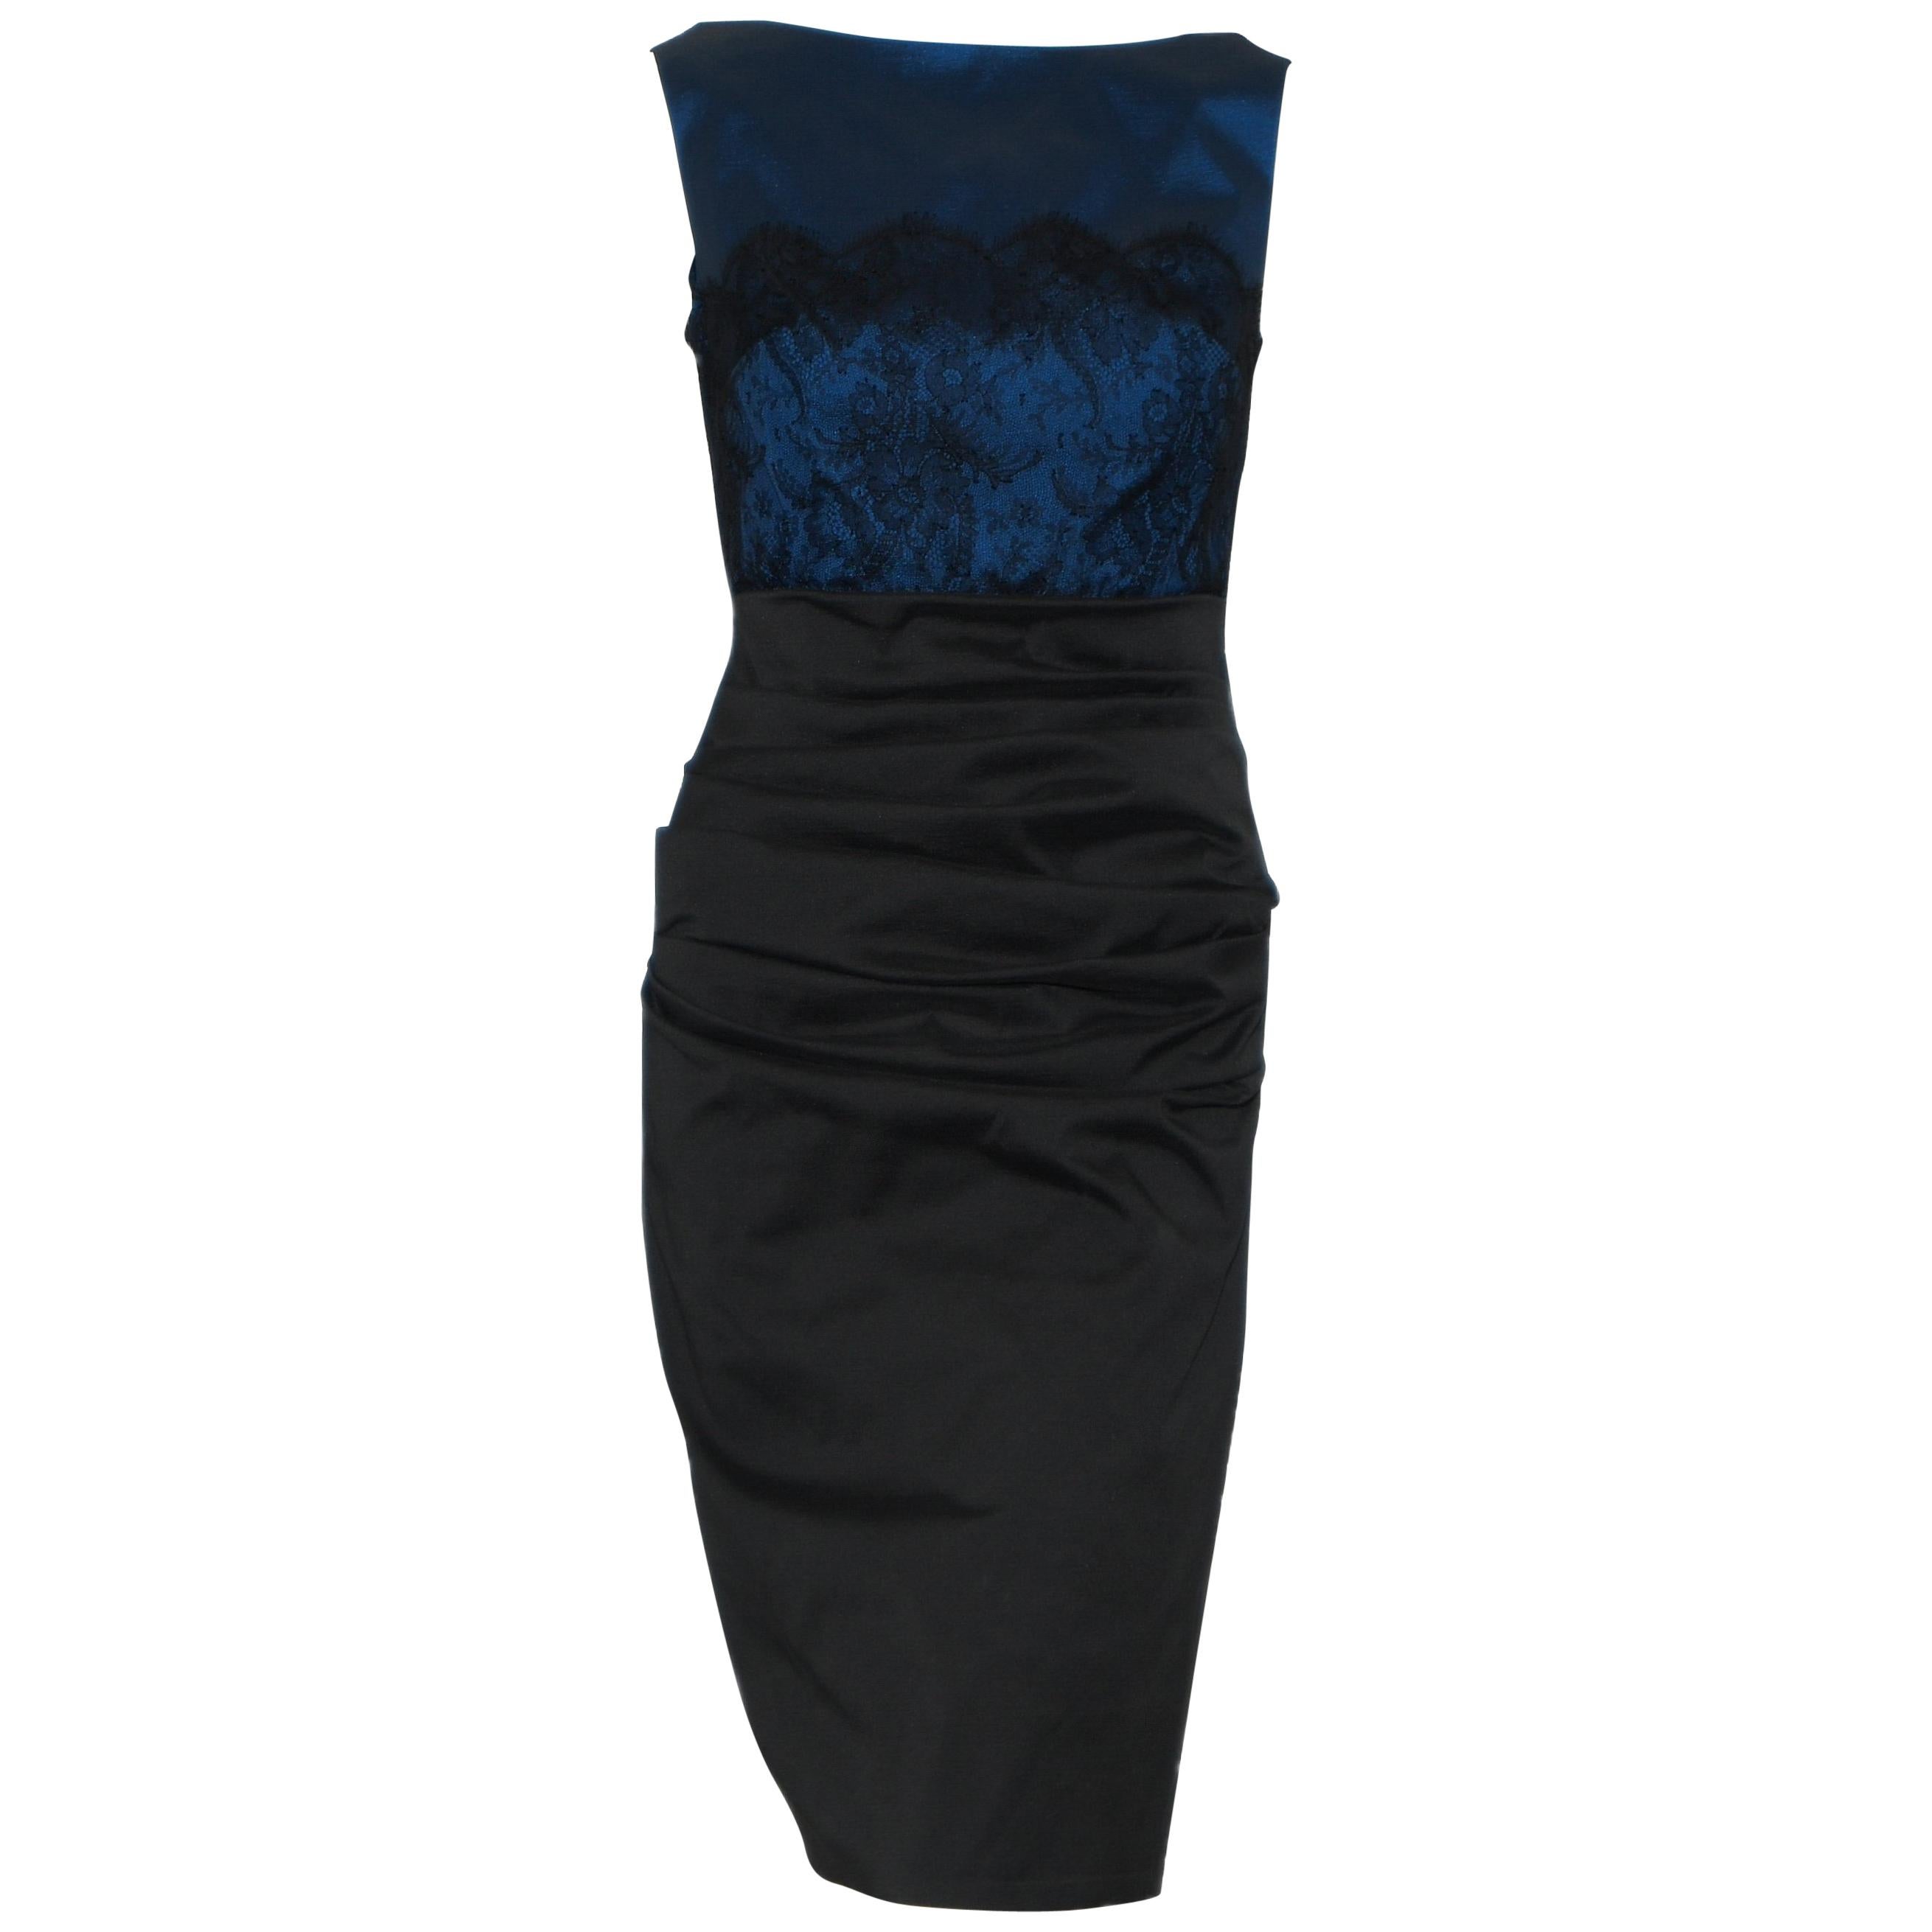 Talbot Runhof Royal Blue Bodice With Black Lace Overlay Cocktail Dress For Sale